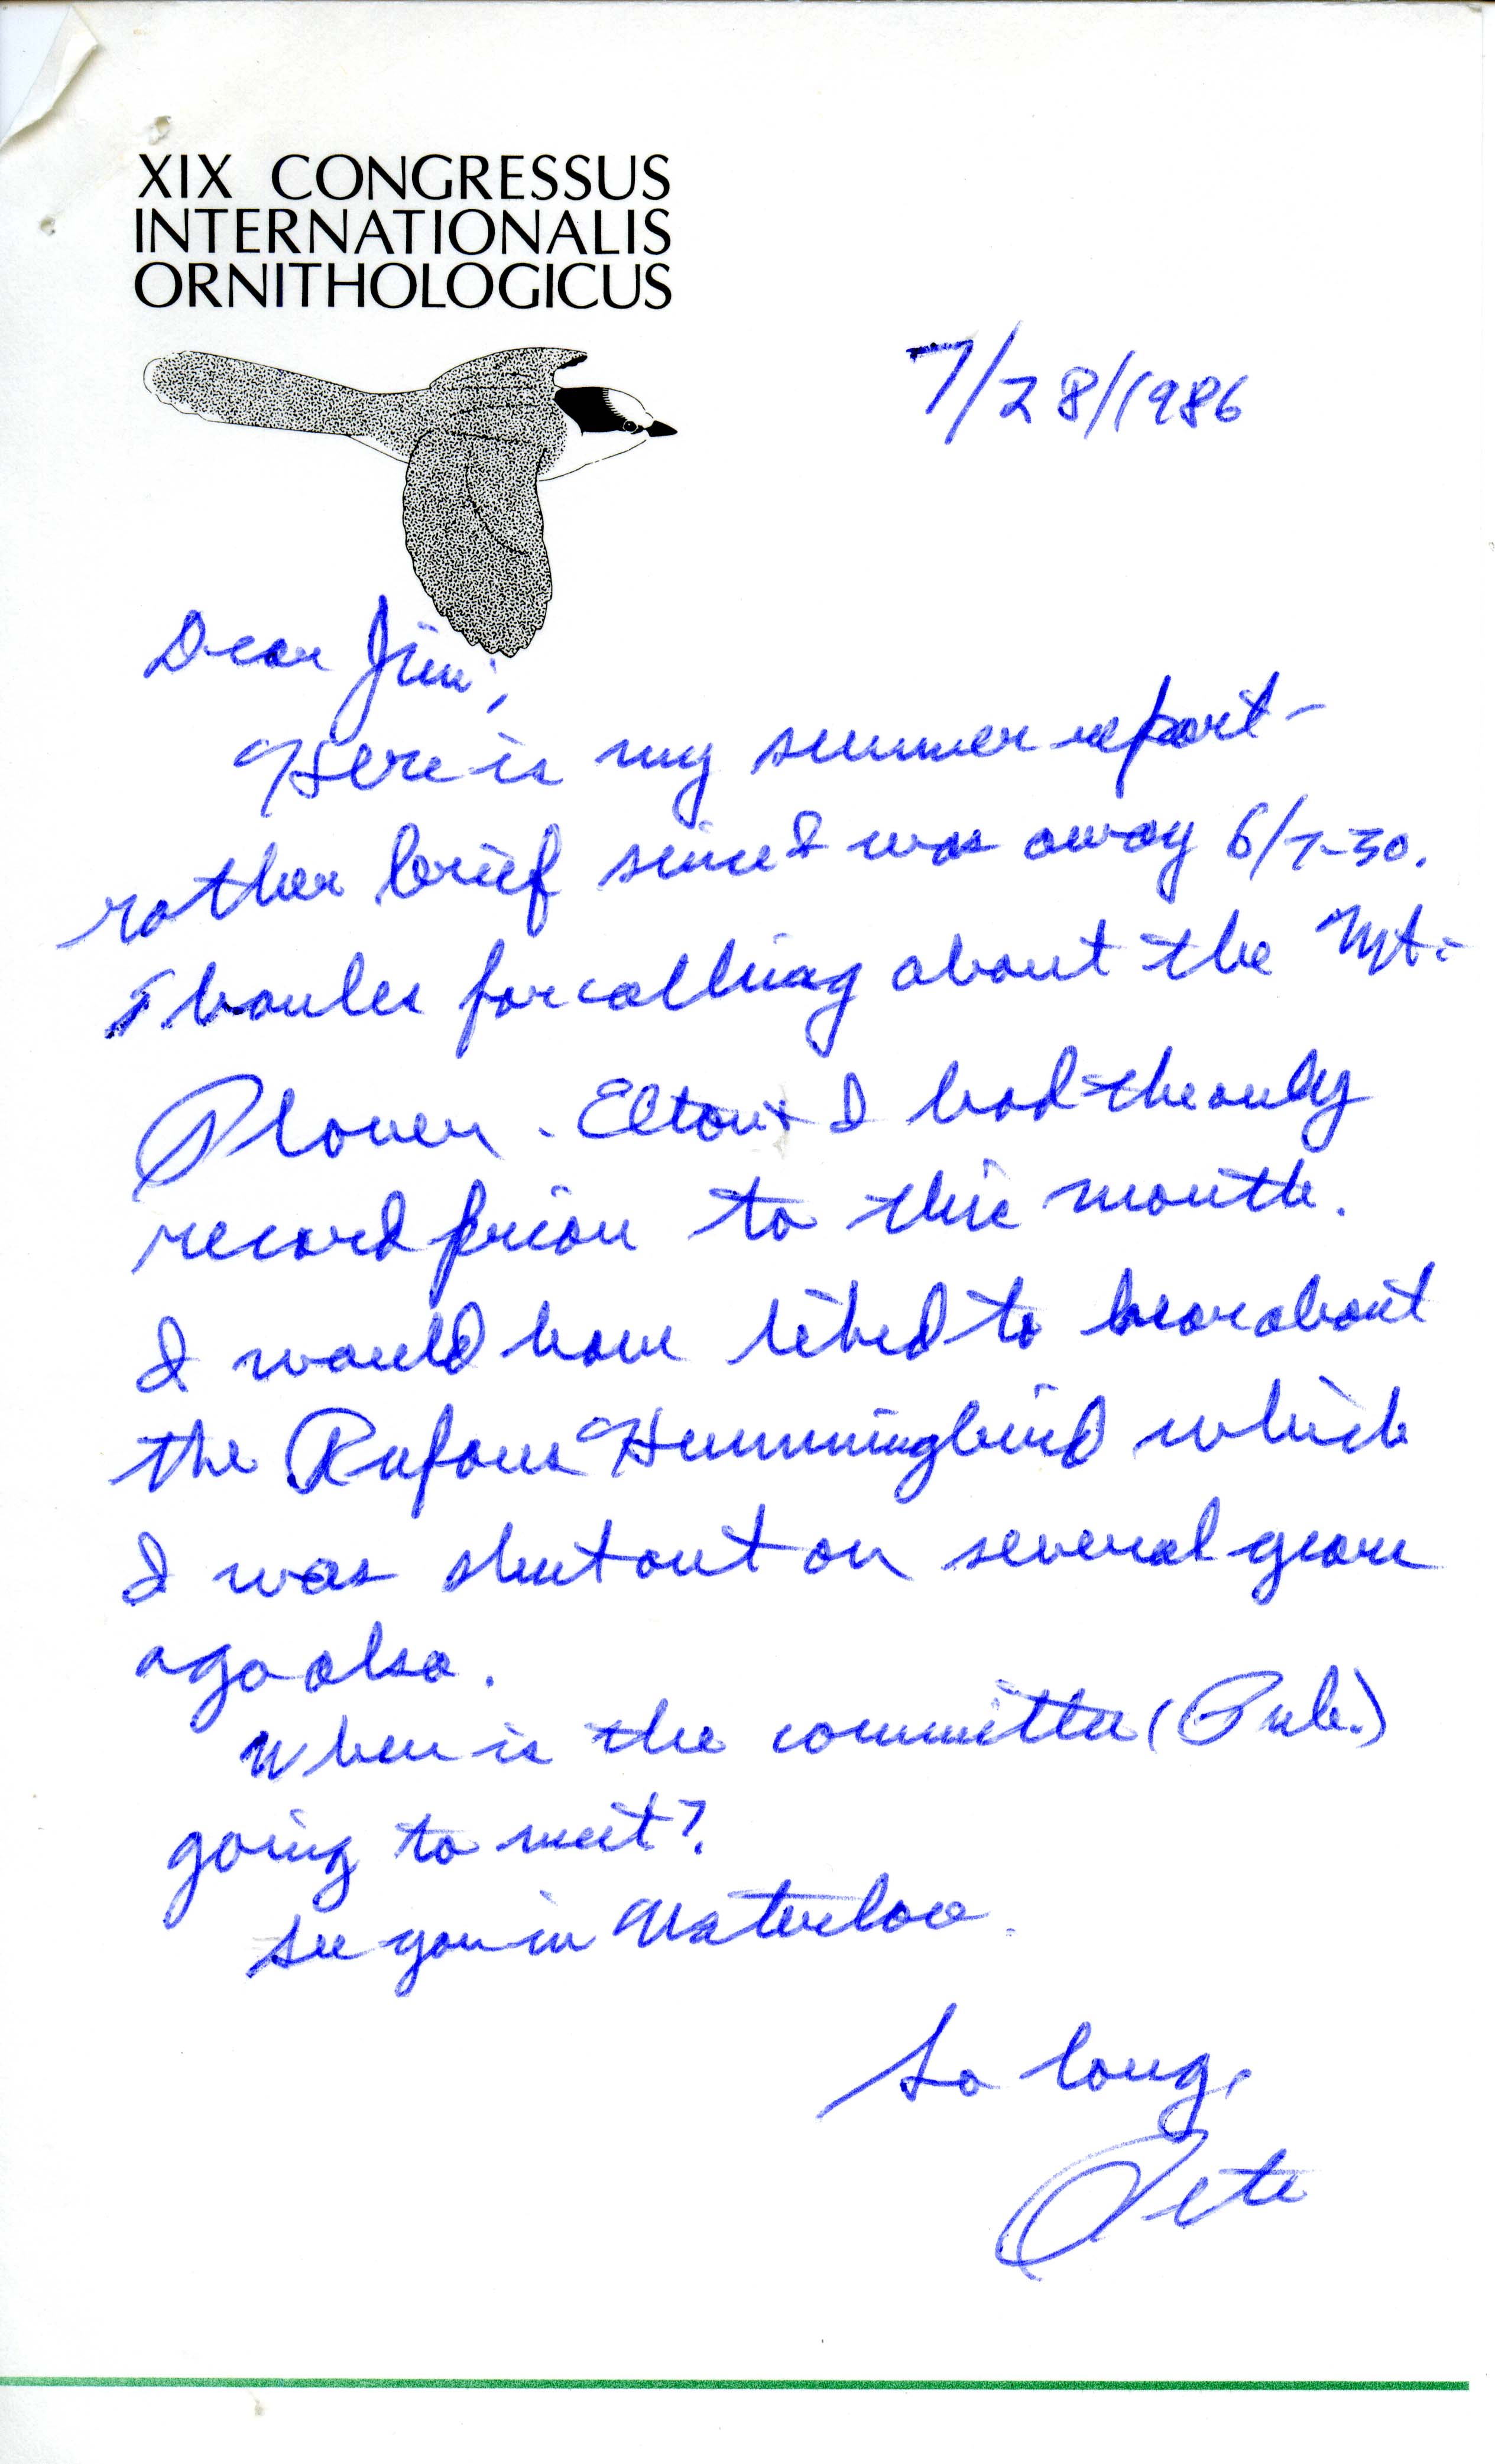 Field notes and Peter C. Petersen letter to James J. Dinsmore, July 28, 1986